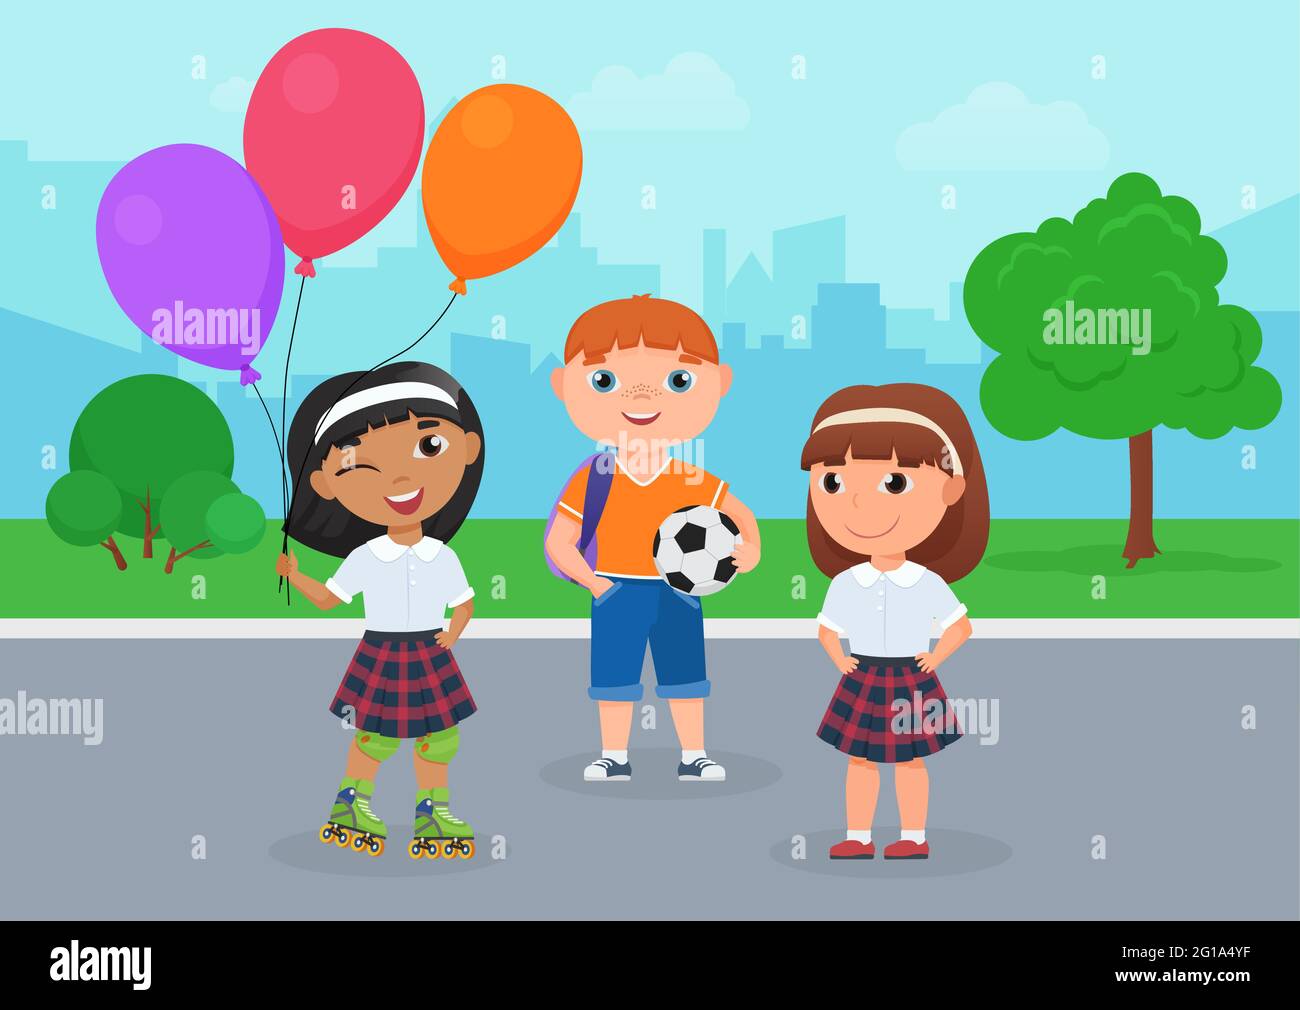 Happy friends children in school uniform stand together in park vector illustration. Cartoon girl in roller skates holding balloons, boy holding ball to play football, kids friendship background Stock Vector